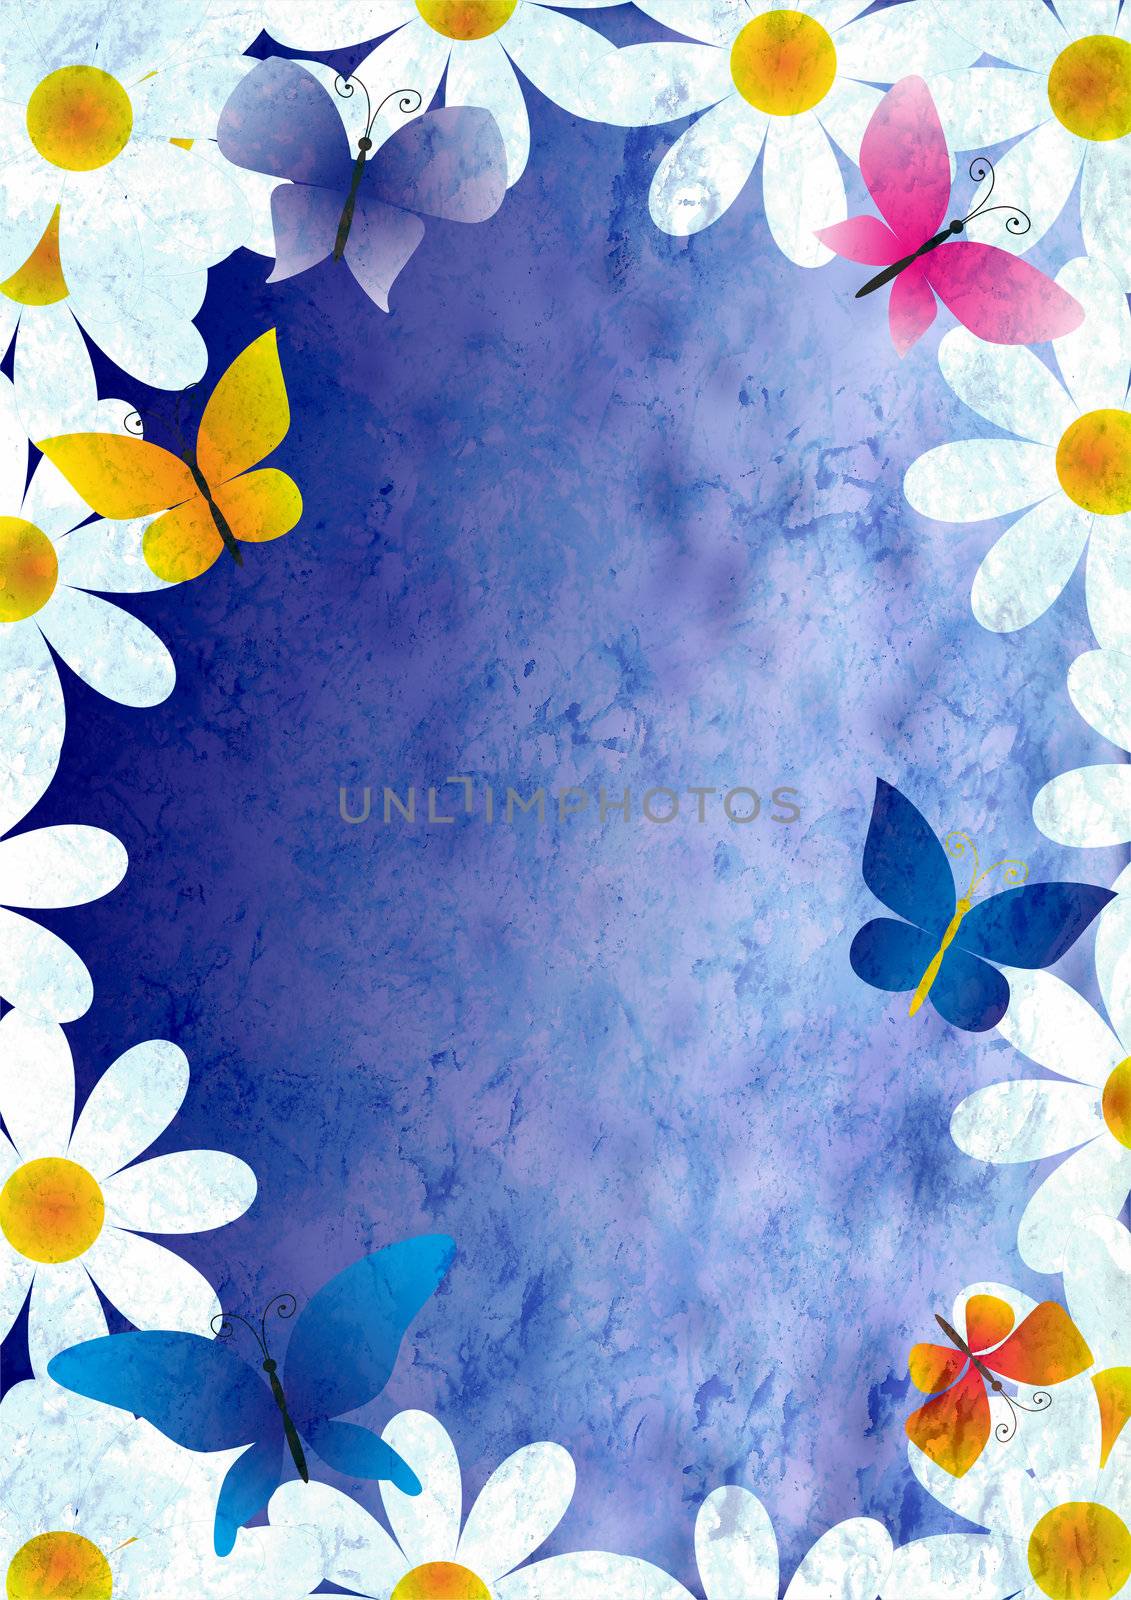 flowers and butterflies grunge style spring background vintage paper